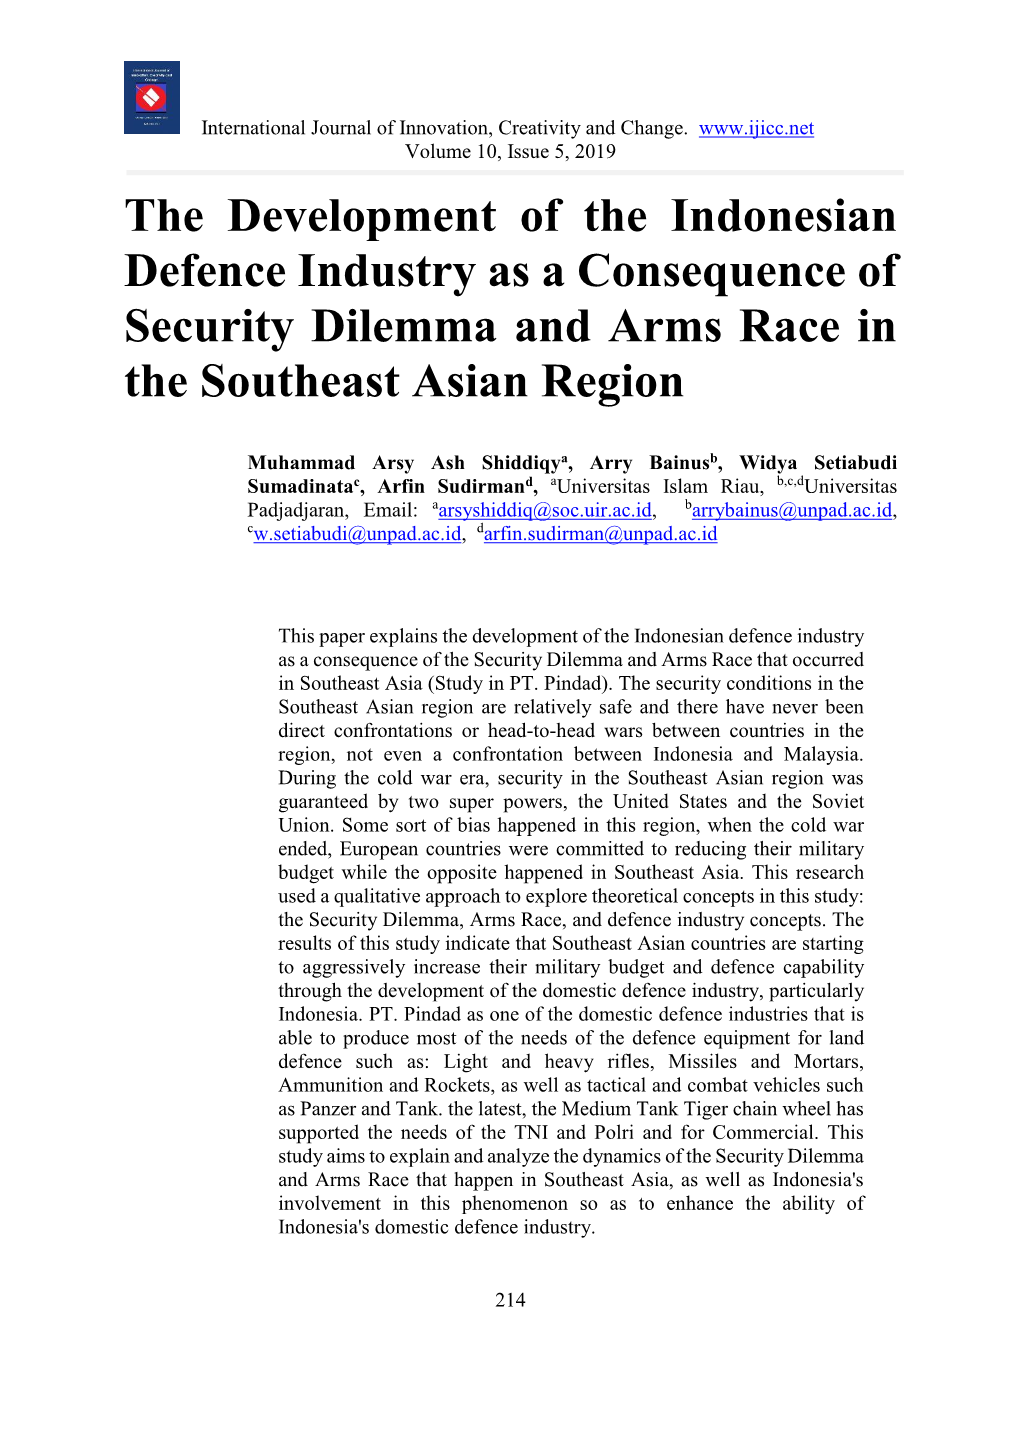 The Development of the Indonesian Defence Industry As a Consequence of Security Dilemma and Arms Race in the Southeast Asian Region